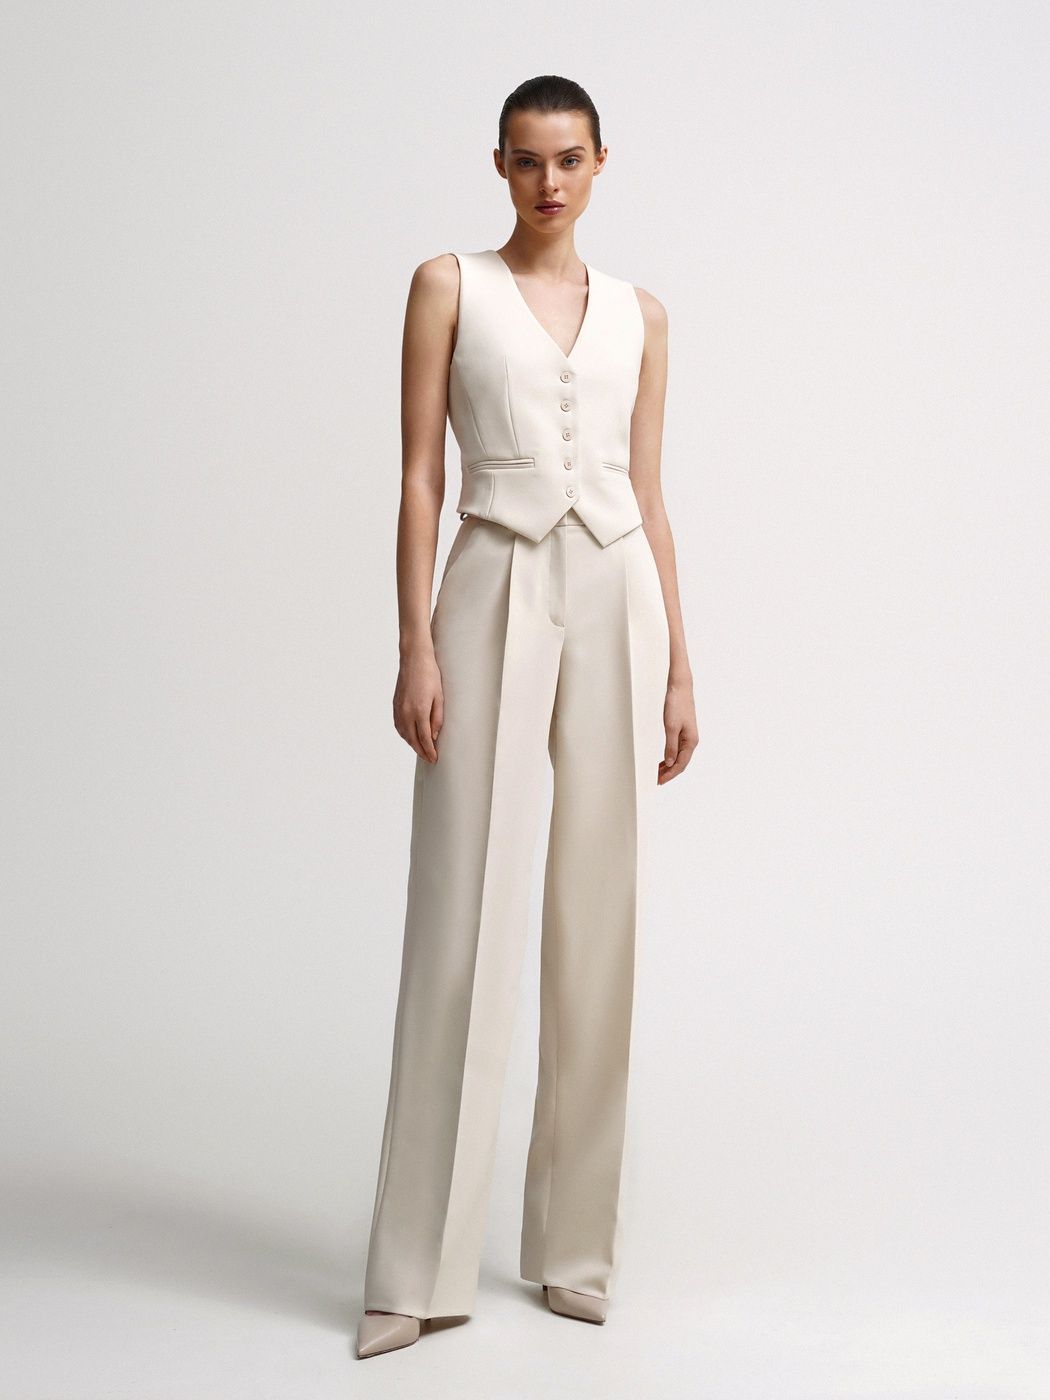 Elegant Trousers For Women Of All Ages